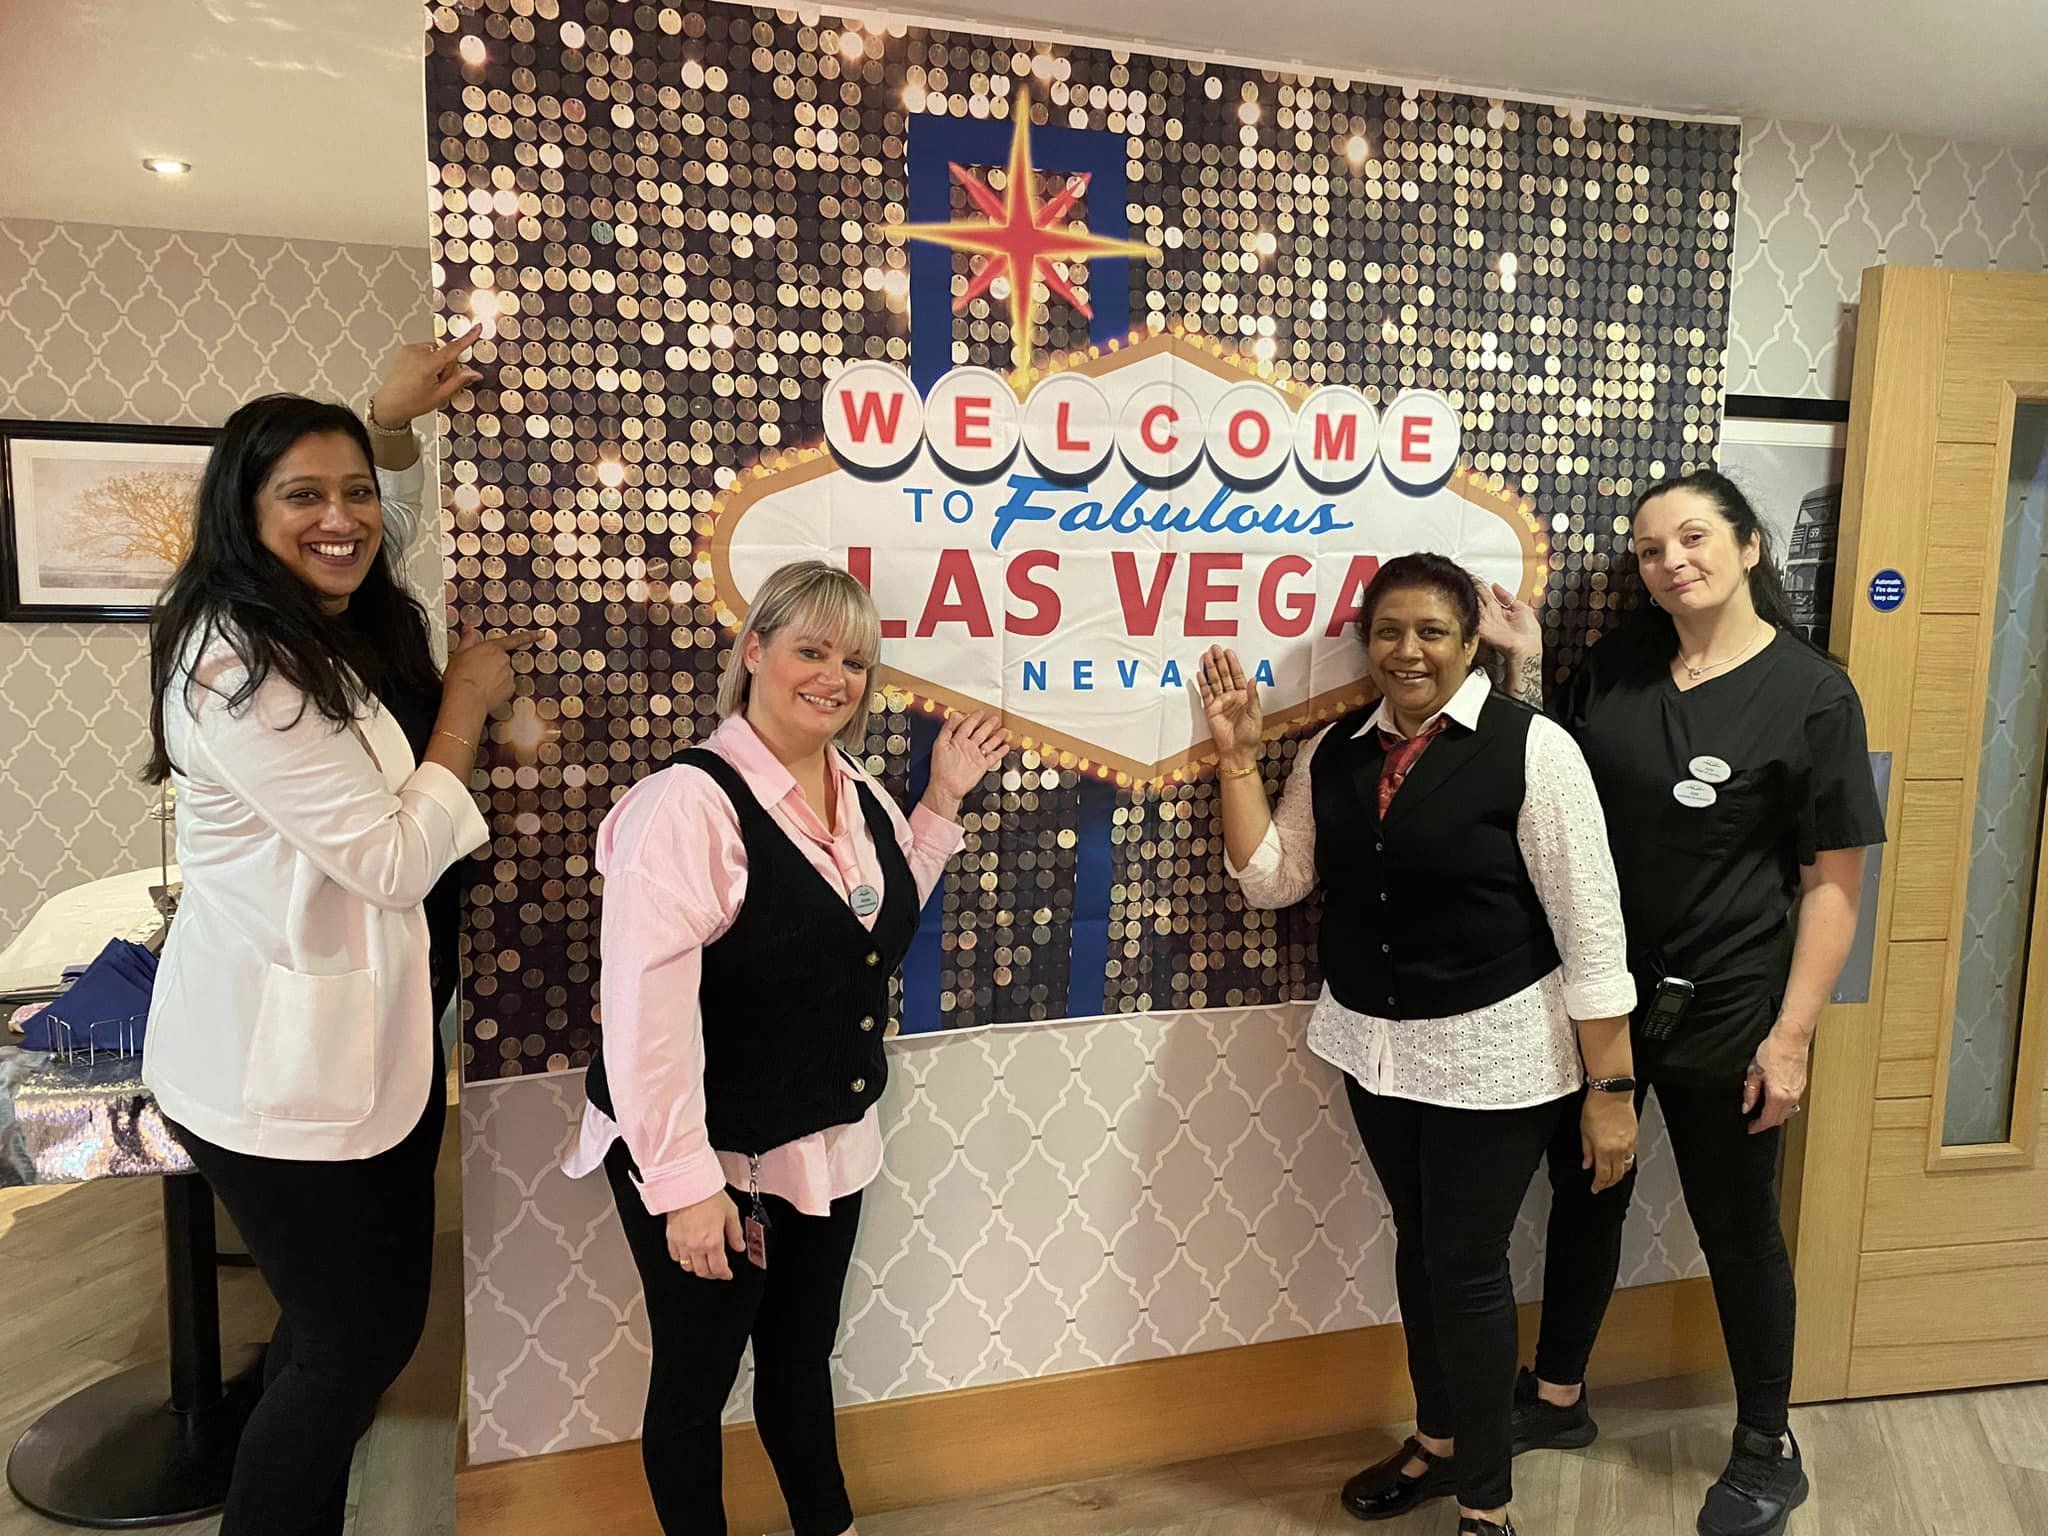 Our staff dressed up in smart clothes in front of a Las Vegas sign for our Casino Morning at Haling Park